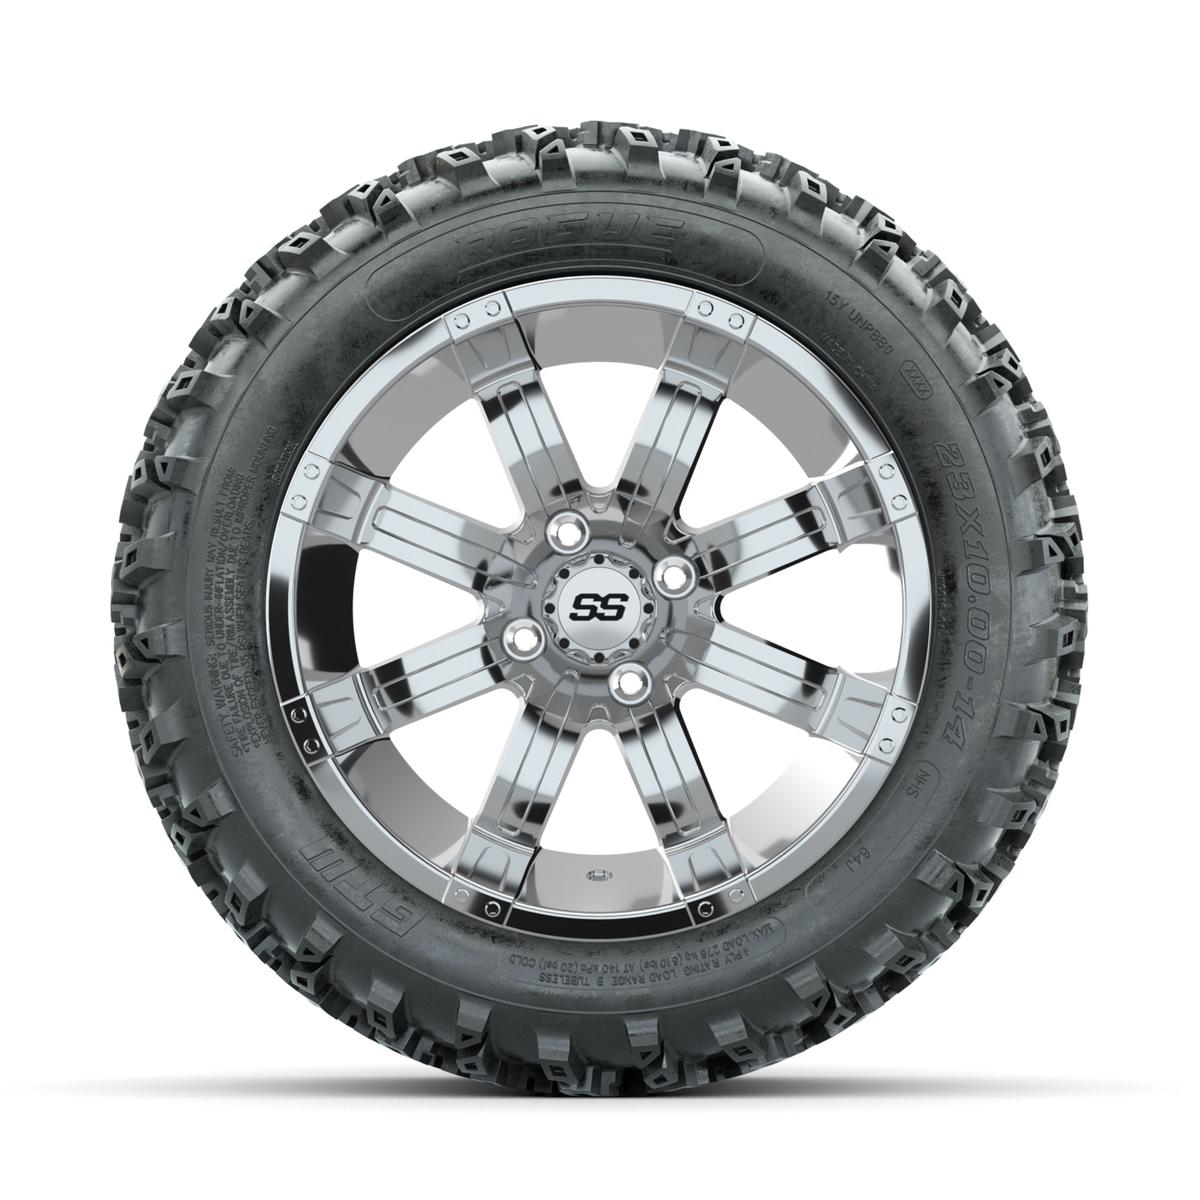 GTW Tempest Chrome 14 in Wheels with 23x10.00-14 Rogue All Terrain Tires – Full Set